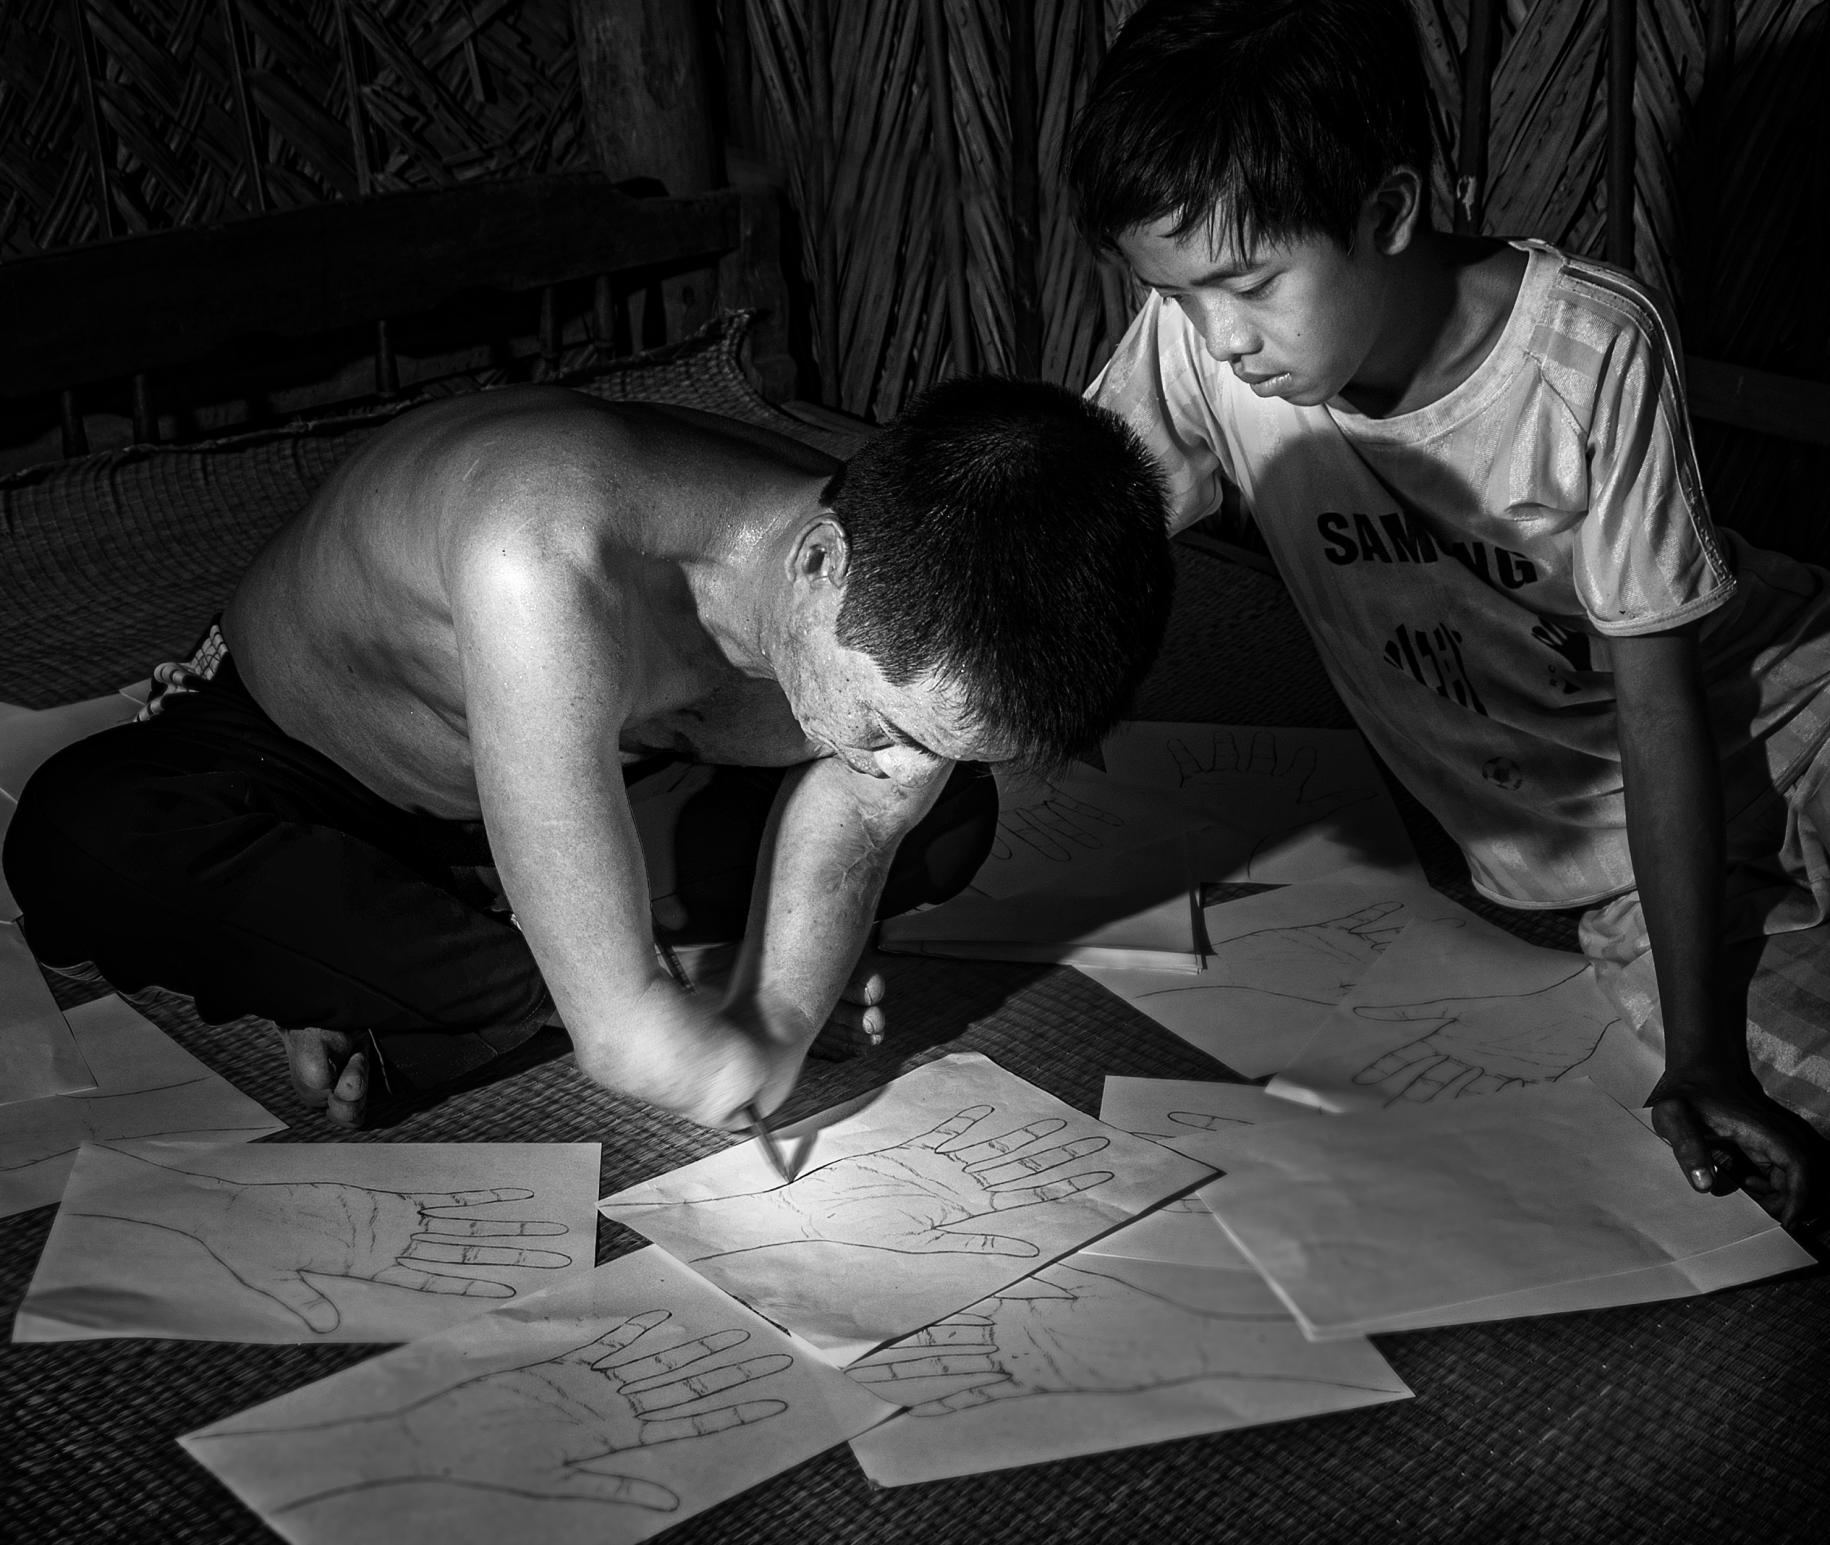 Black and white photo of a man and boy. The man has an amputated hand, sit together on the ground drawing and writing on sheets of paper.